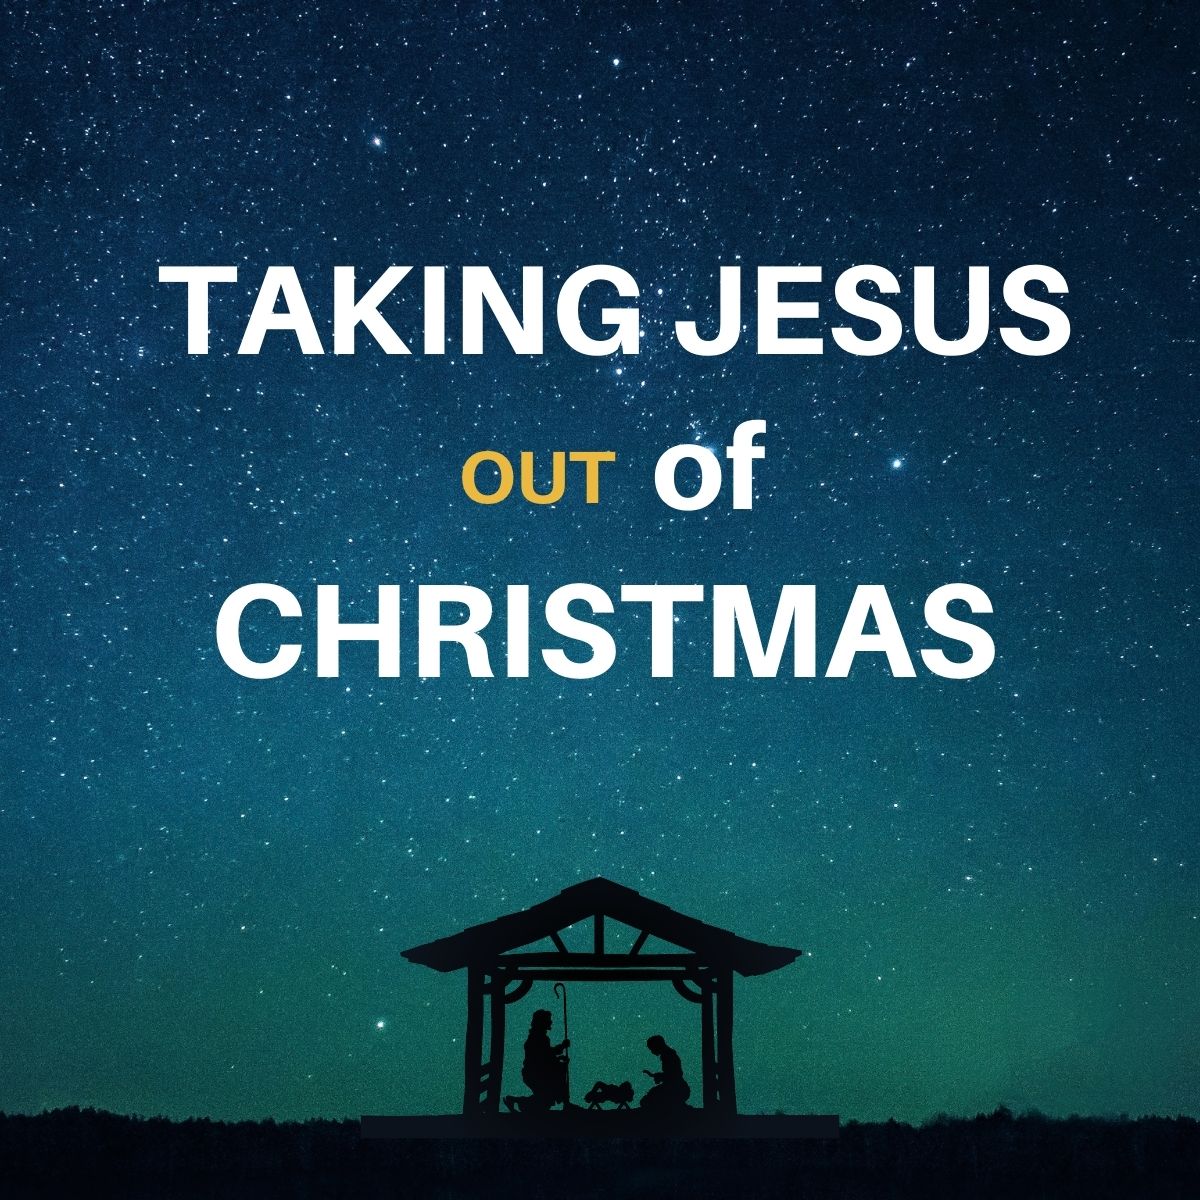 Taking Jesus Out of Christmas